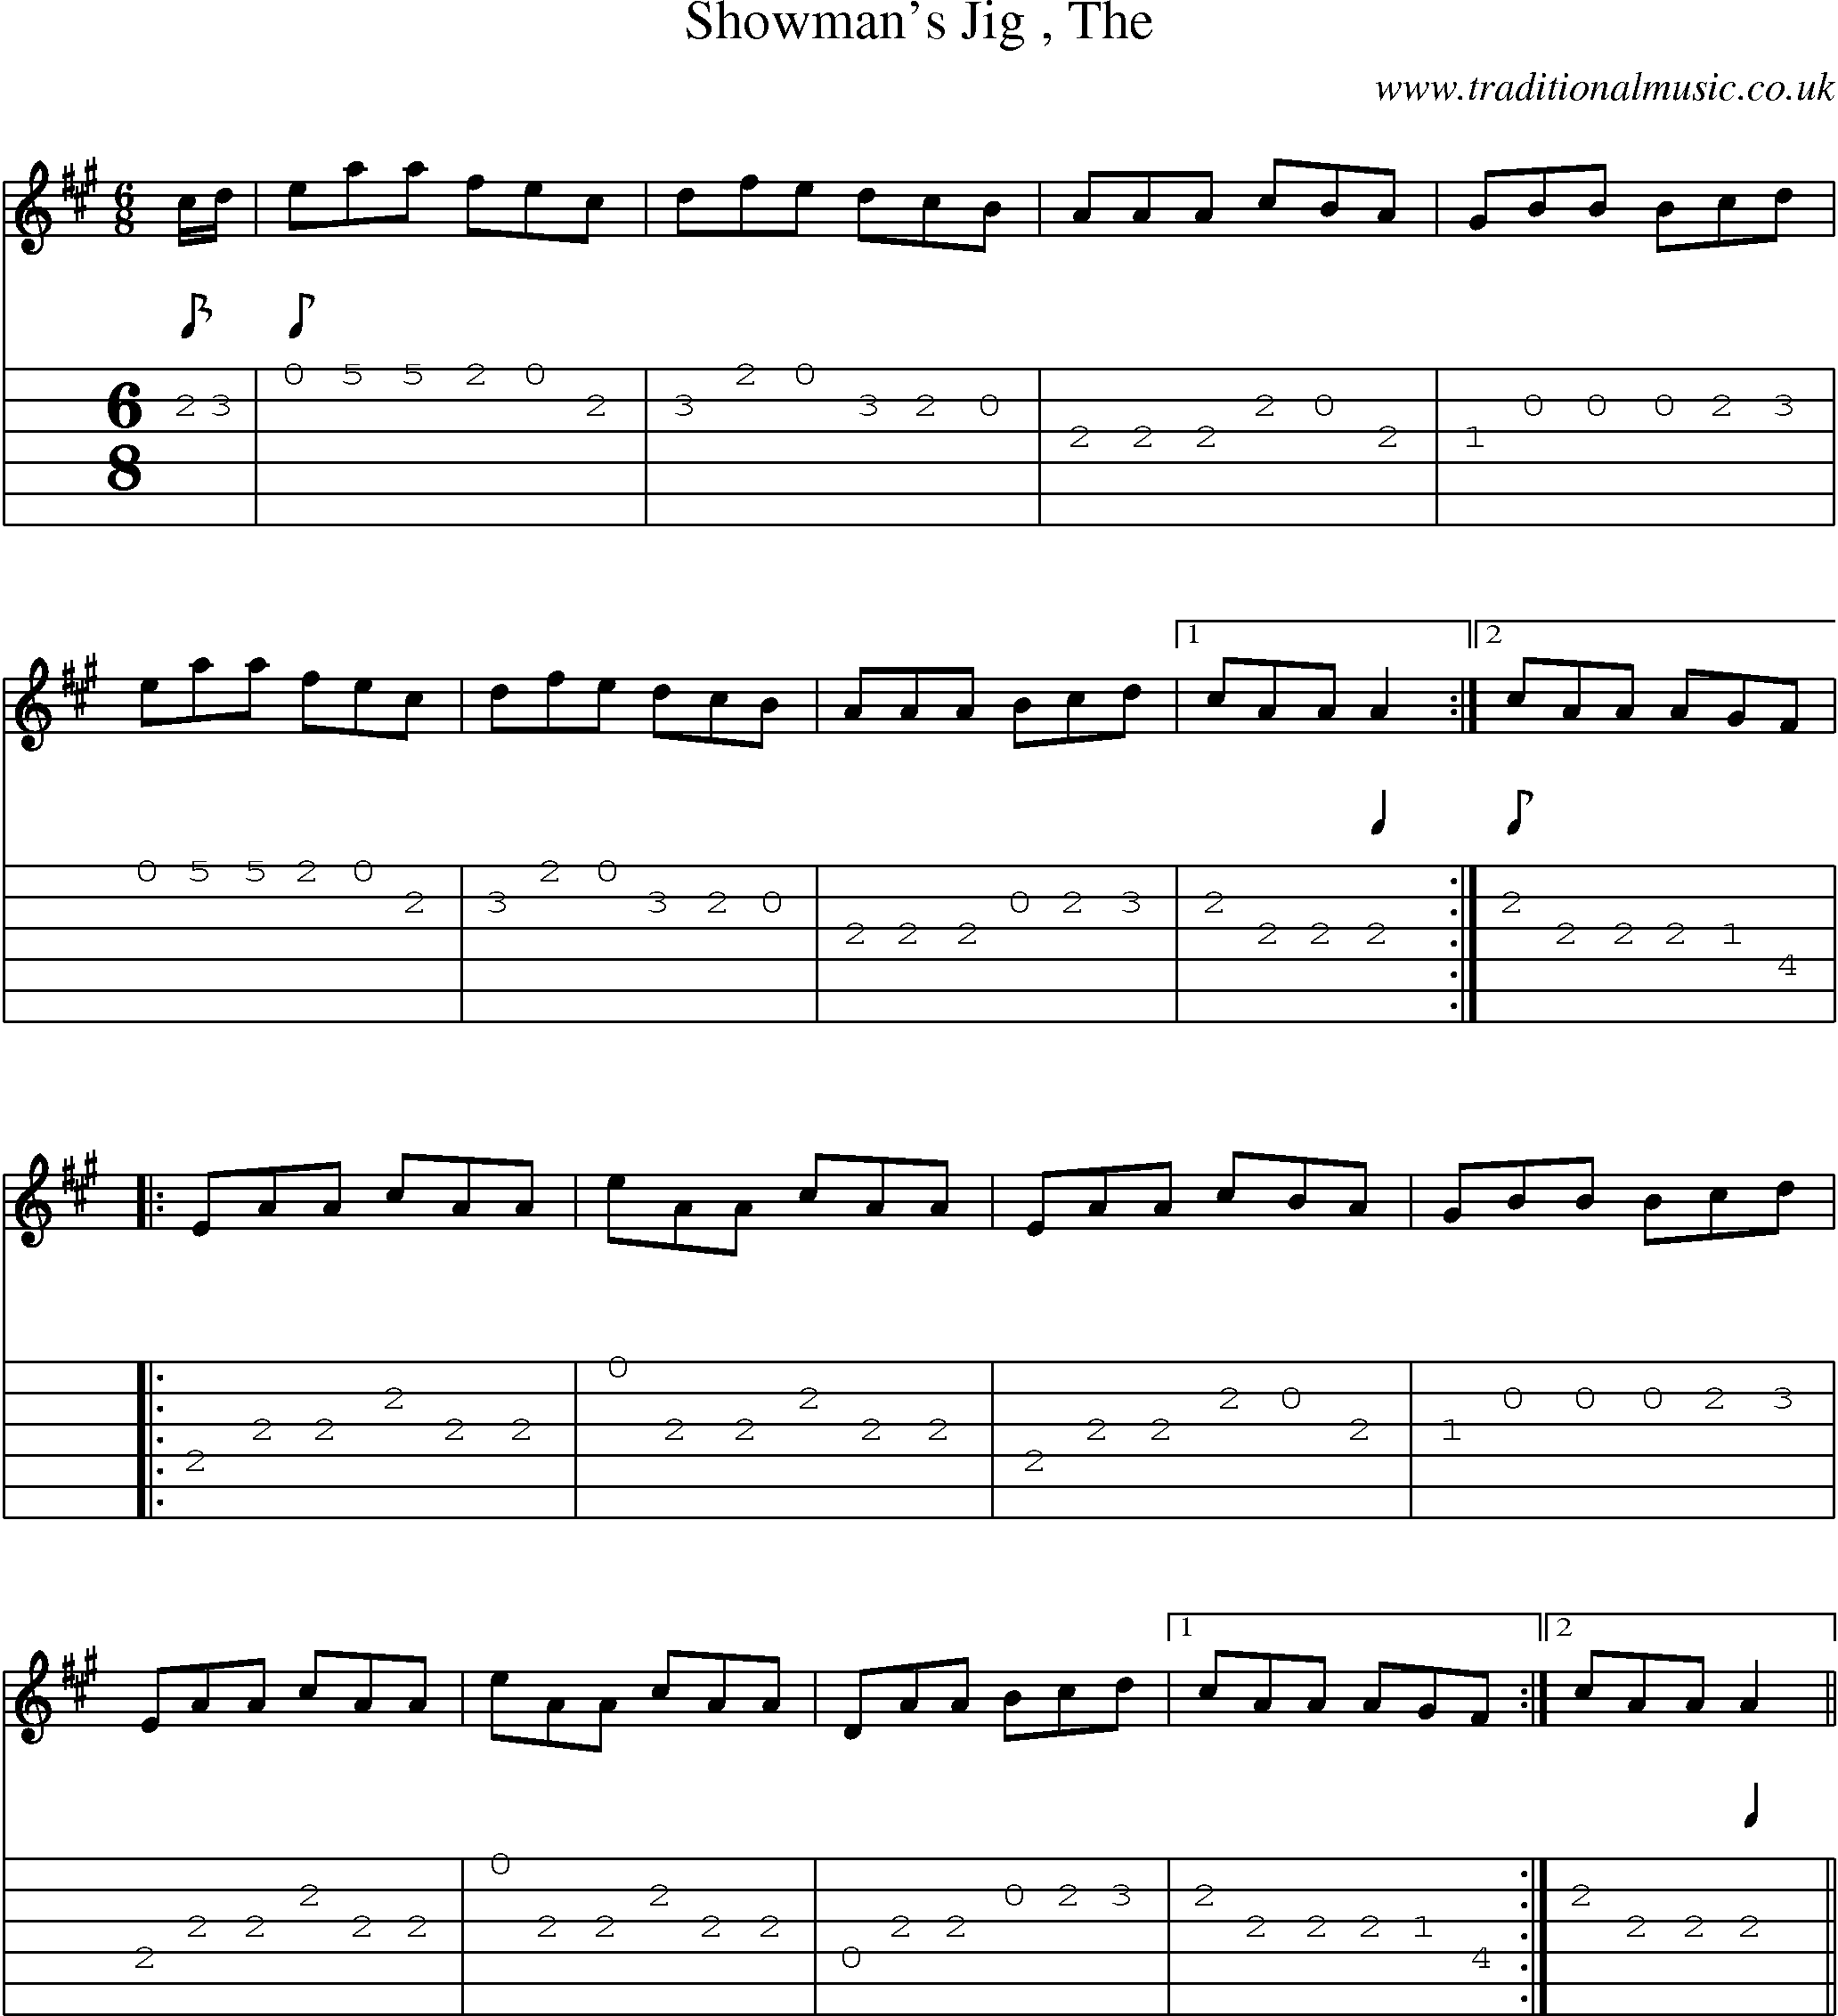 Music Score and Guitar Tabs for Showmans Jig